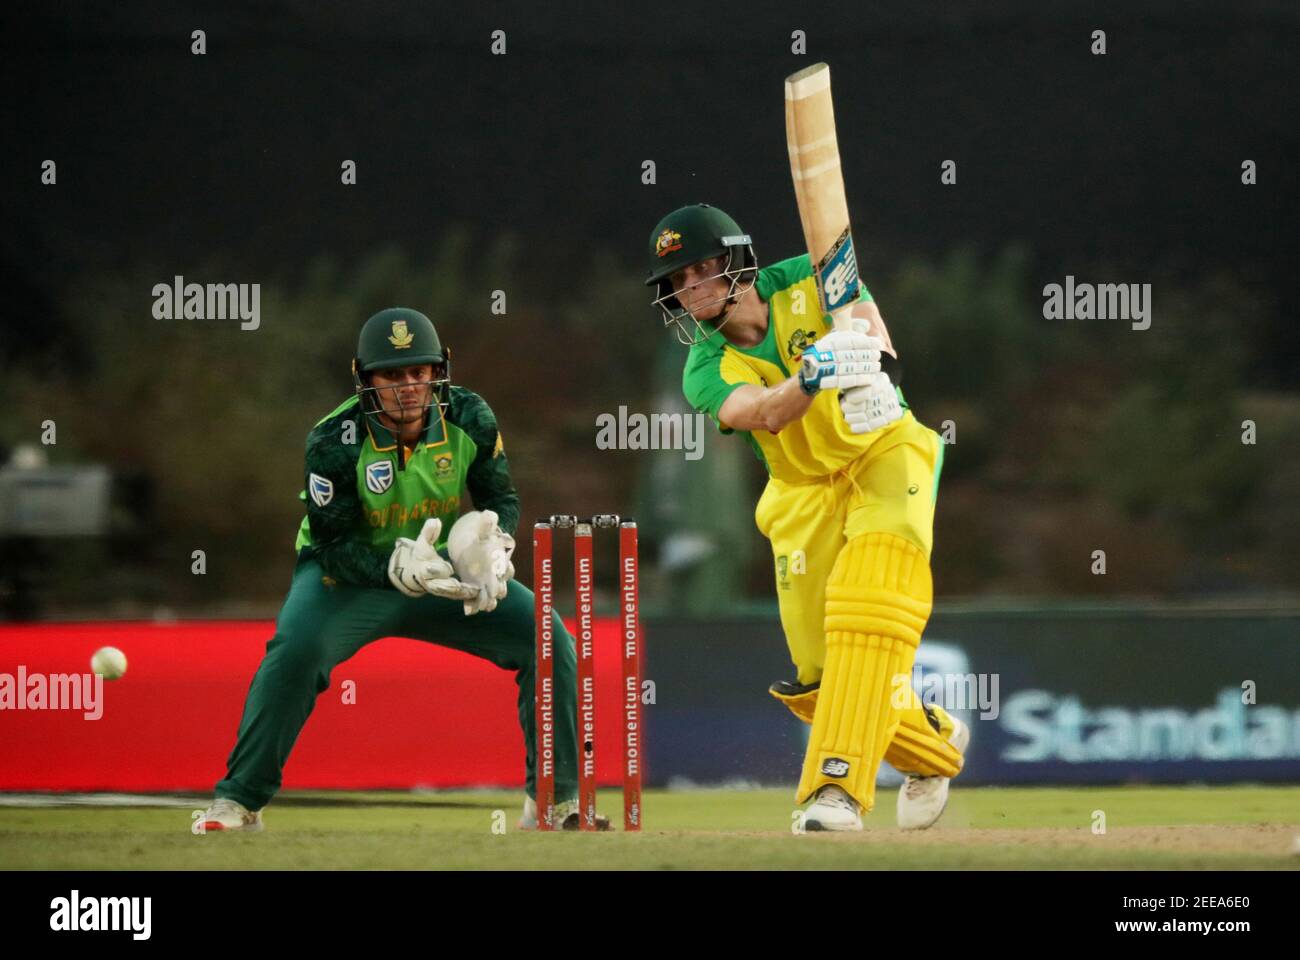 Cricket - South Africa v Australia - First ODI - Boland Park, Paarl, South Africa - February 29, 2020   Australia's Steven Smith in action   REUTERS/Mike Hutchings Stock Photo